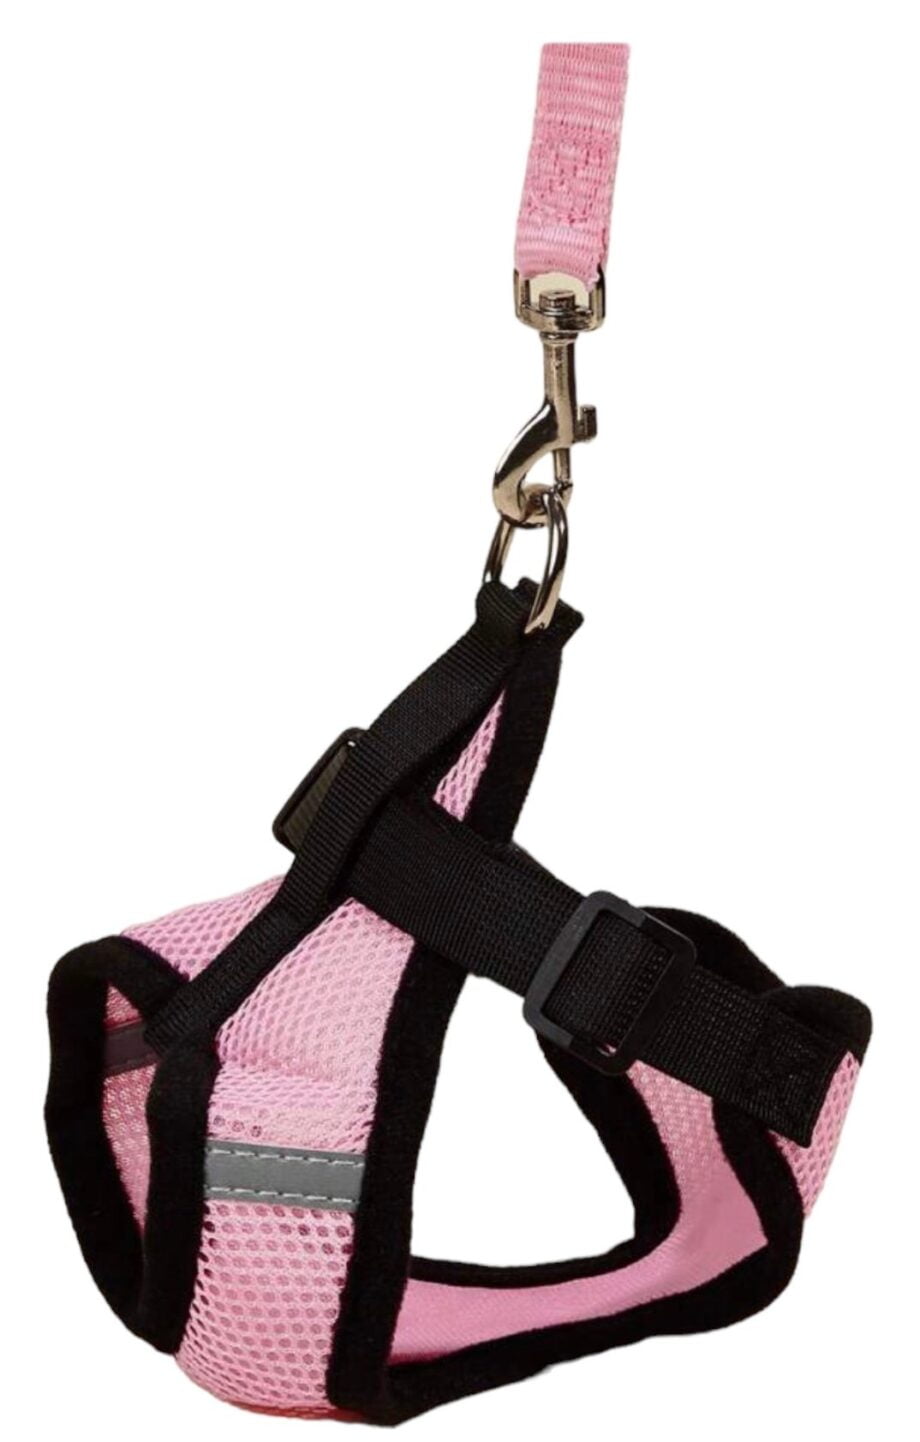 Breathable harness and leash set